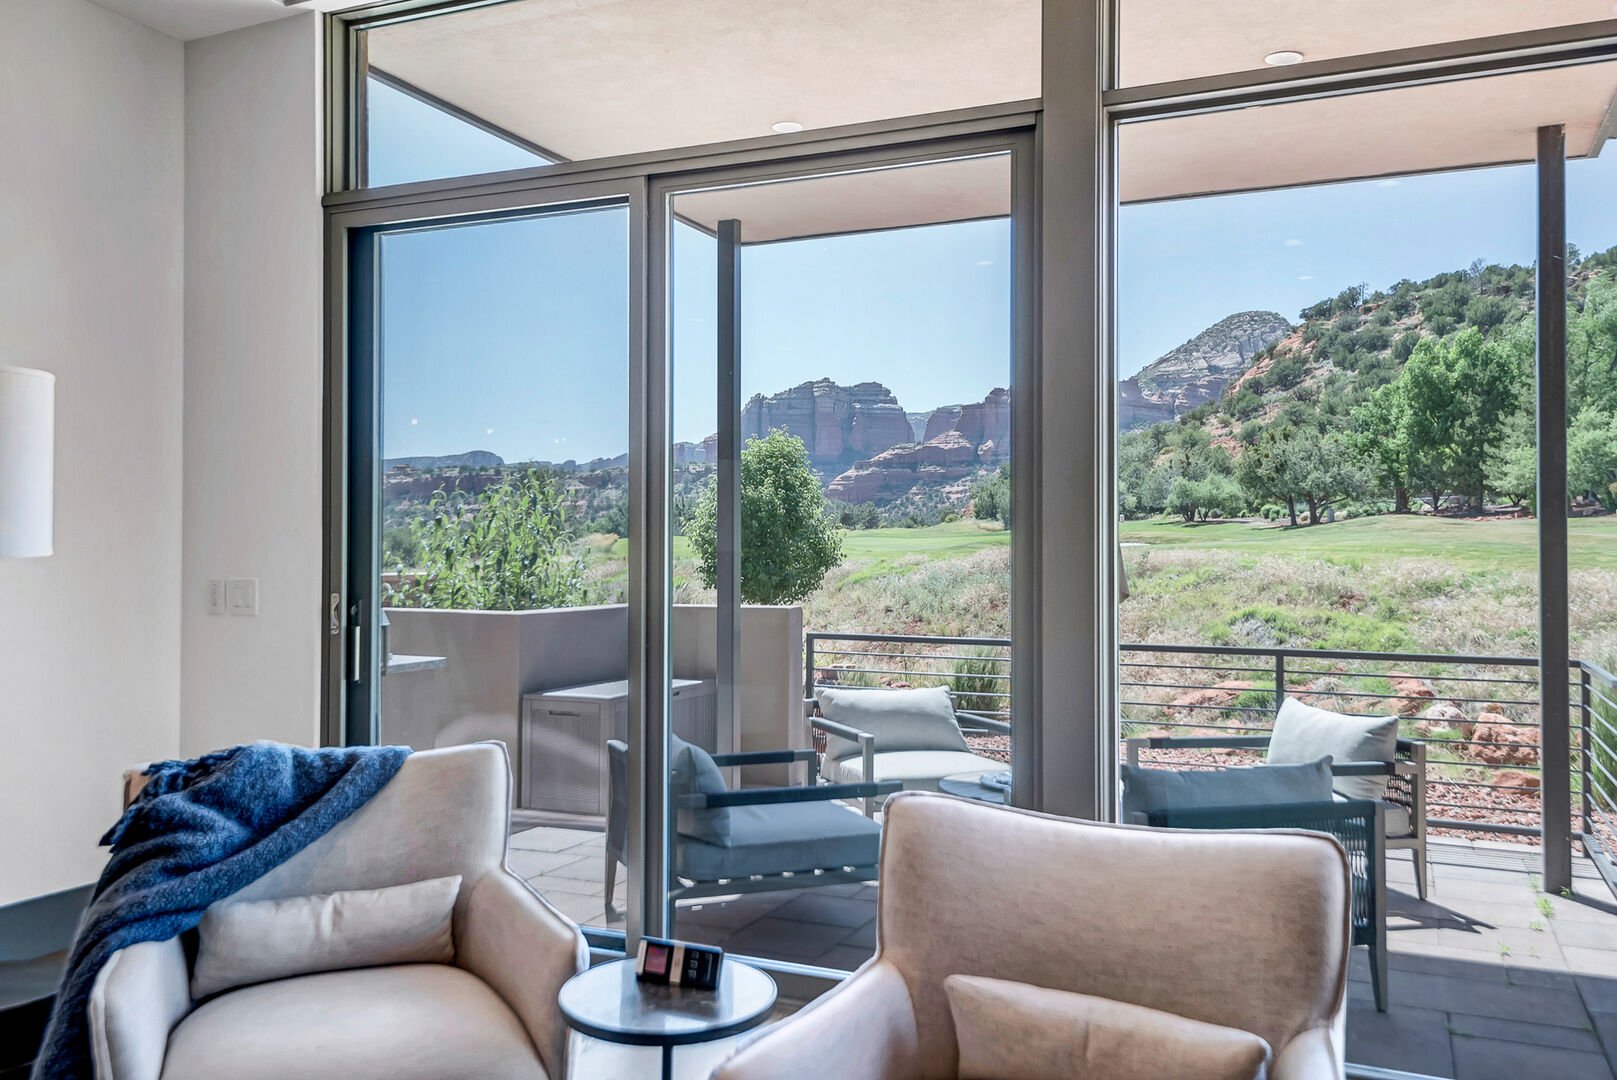 Golf Course and Red Rock Views From the Living Room